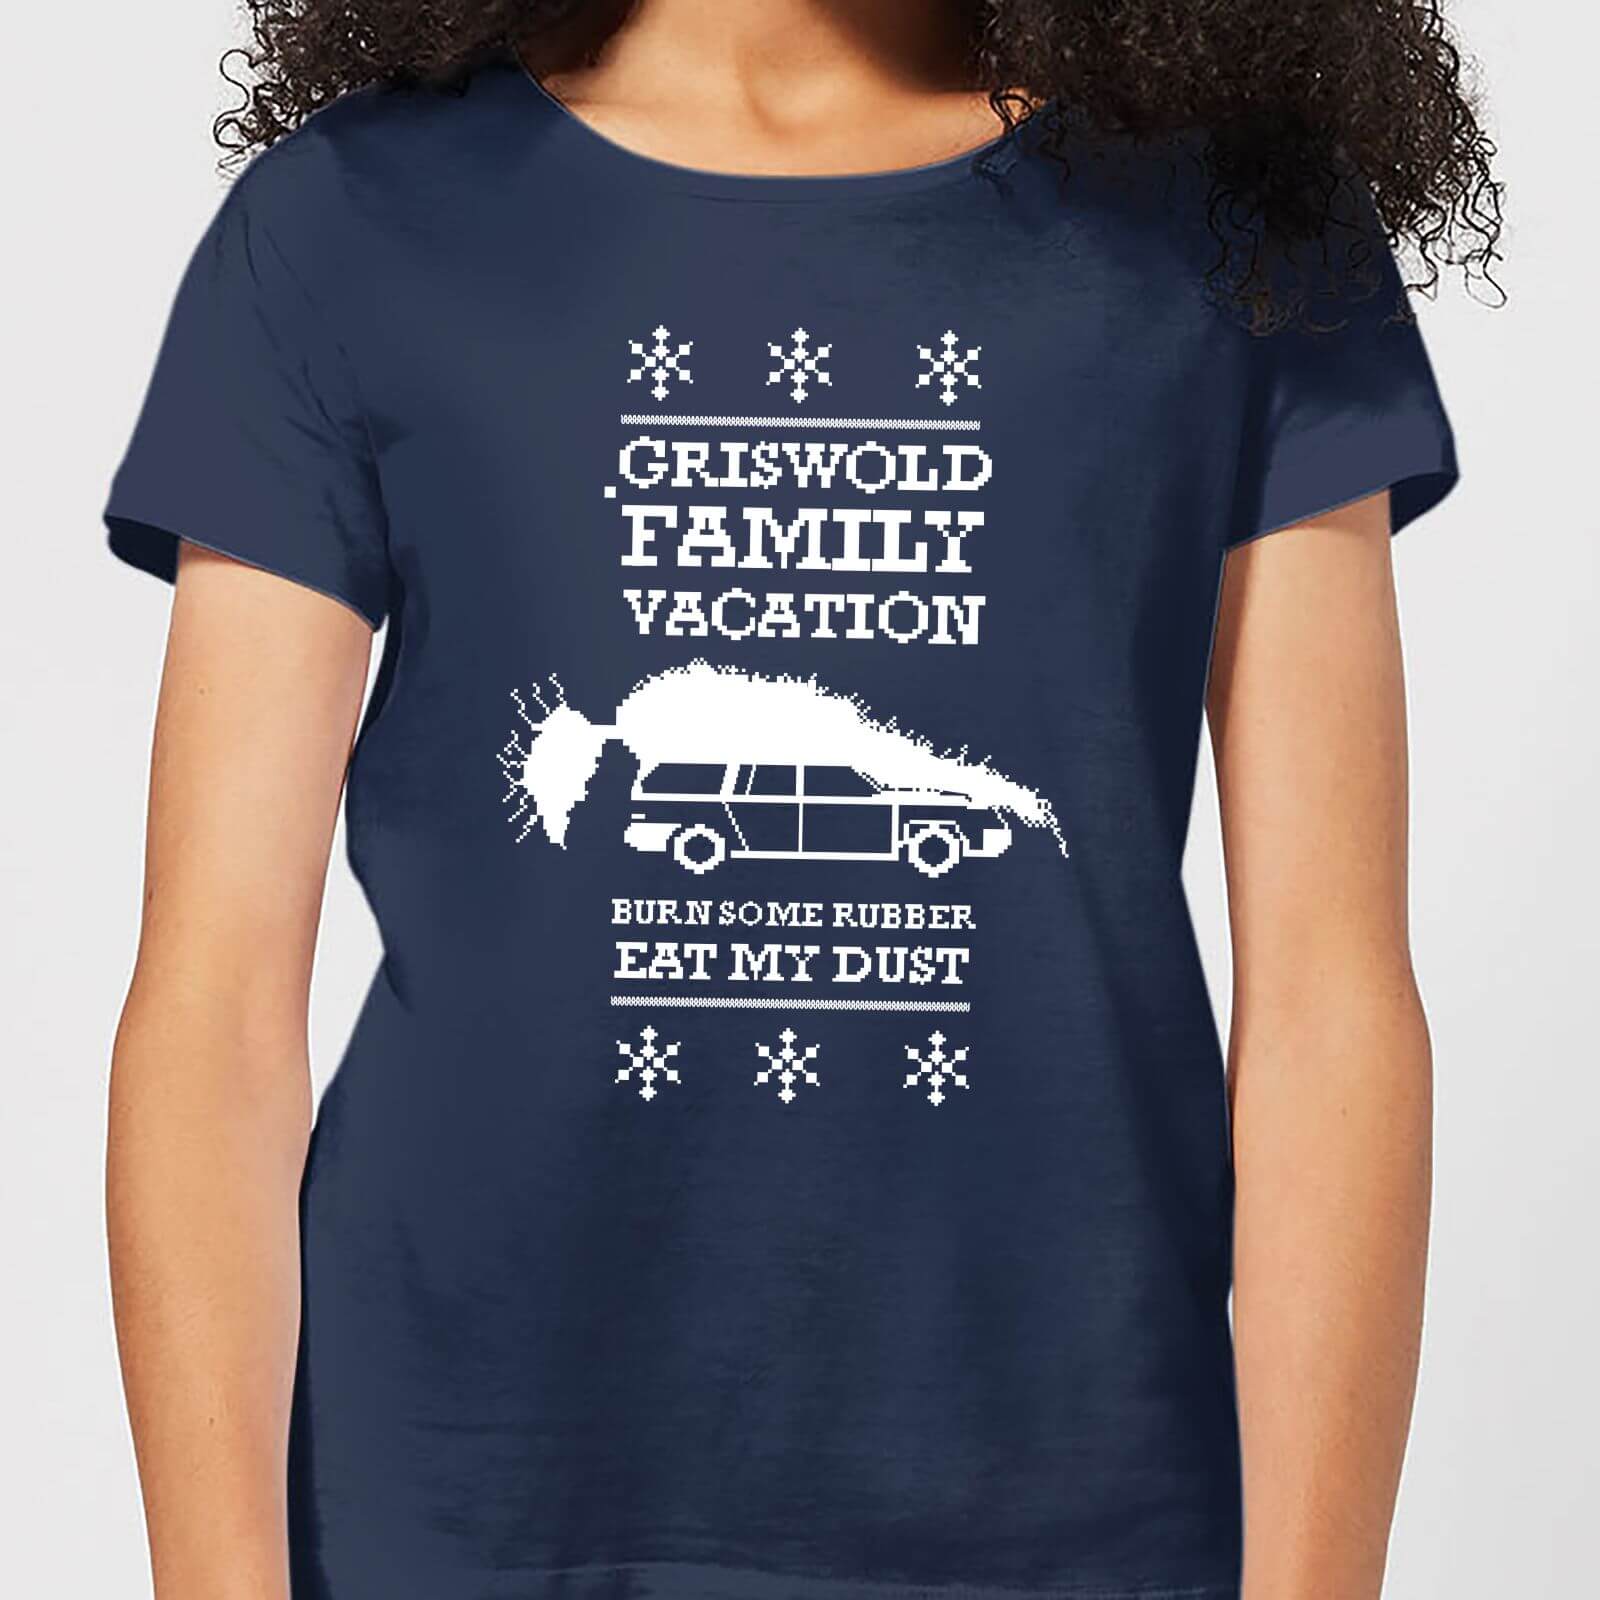 National Lampoon Griswold Vacation Ugly Knit Women's Christmas T-Shirt - Navy - S